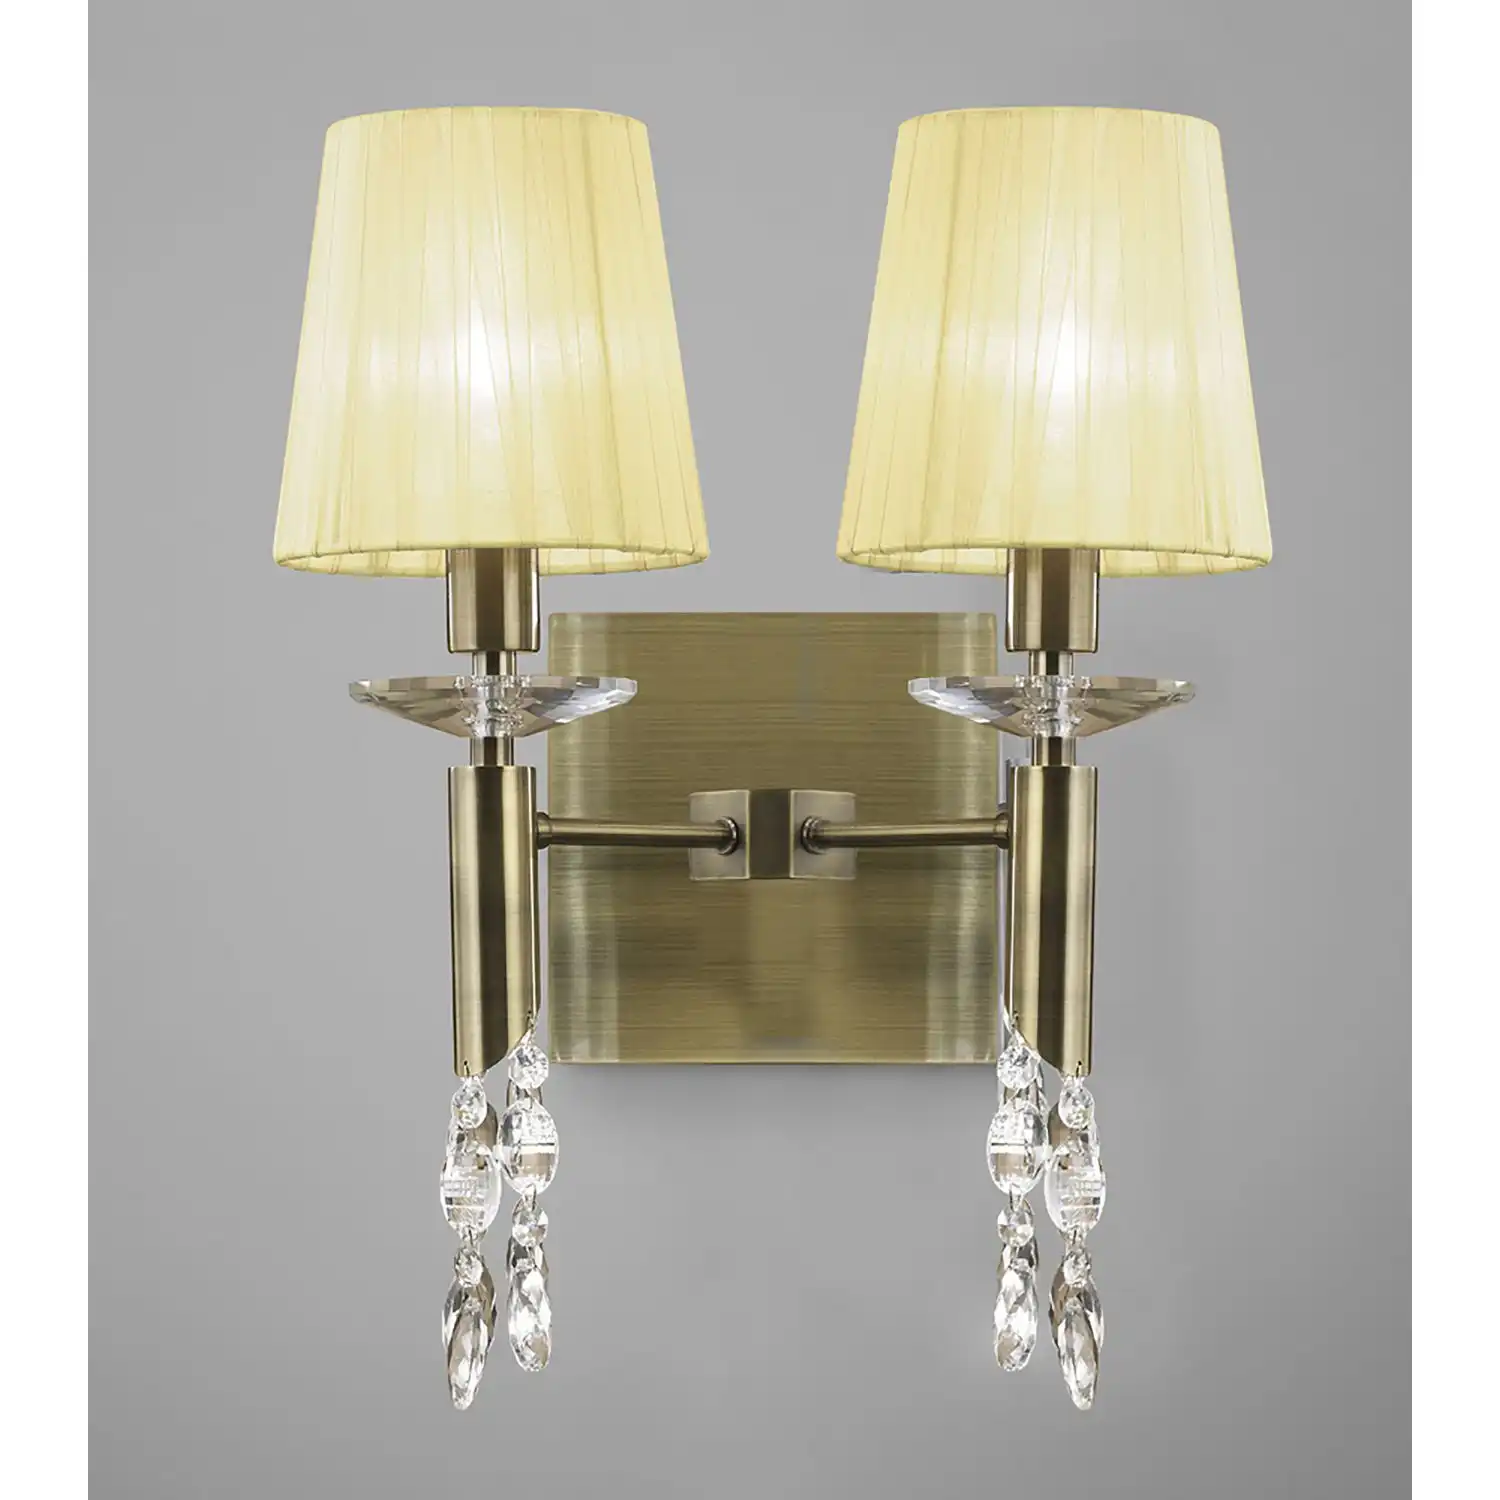 Tiffany Wall Lamp Switched 2+2 Light E14+G9, Antique Brass With Cream Shades And Clear Crystal